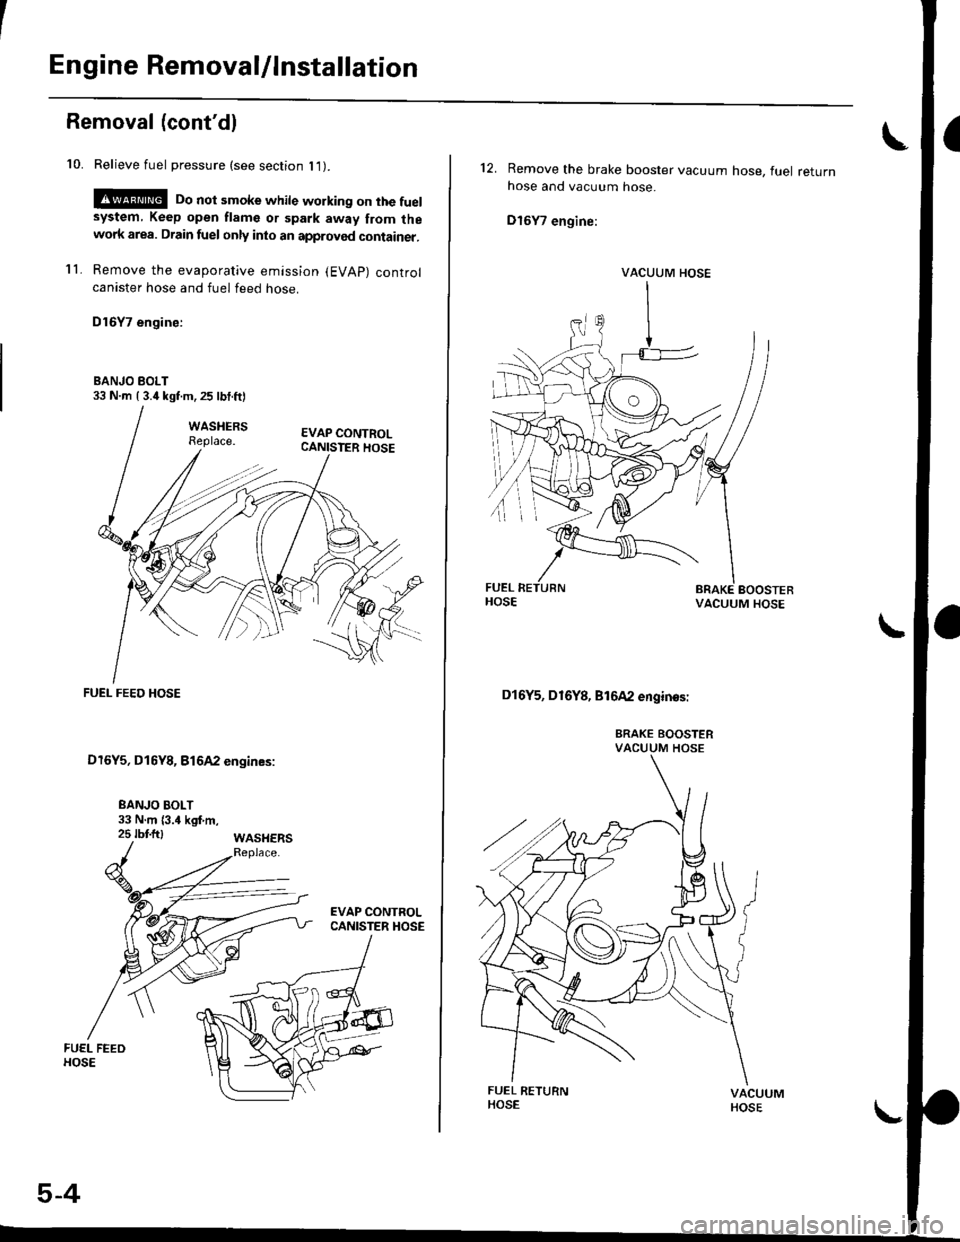 HONDA CIVIC 2000 6.G Workshop Manual Engine Removal/lnstallation
Removal (contdl
10. Relieve fuel pressure (see section l1).
!@ Do not smoke while working on the fuelsystem, Keep open flame or spark away from thewolk area. Drain fuel on